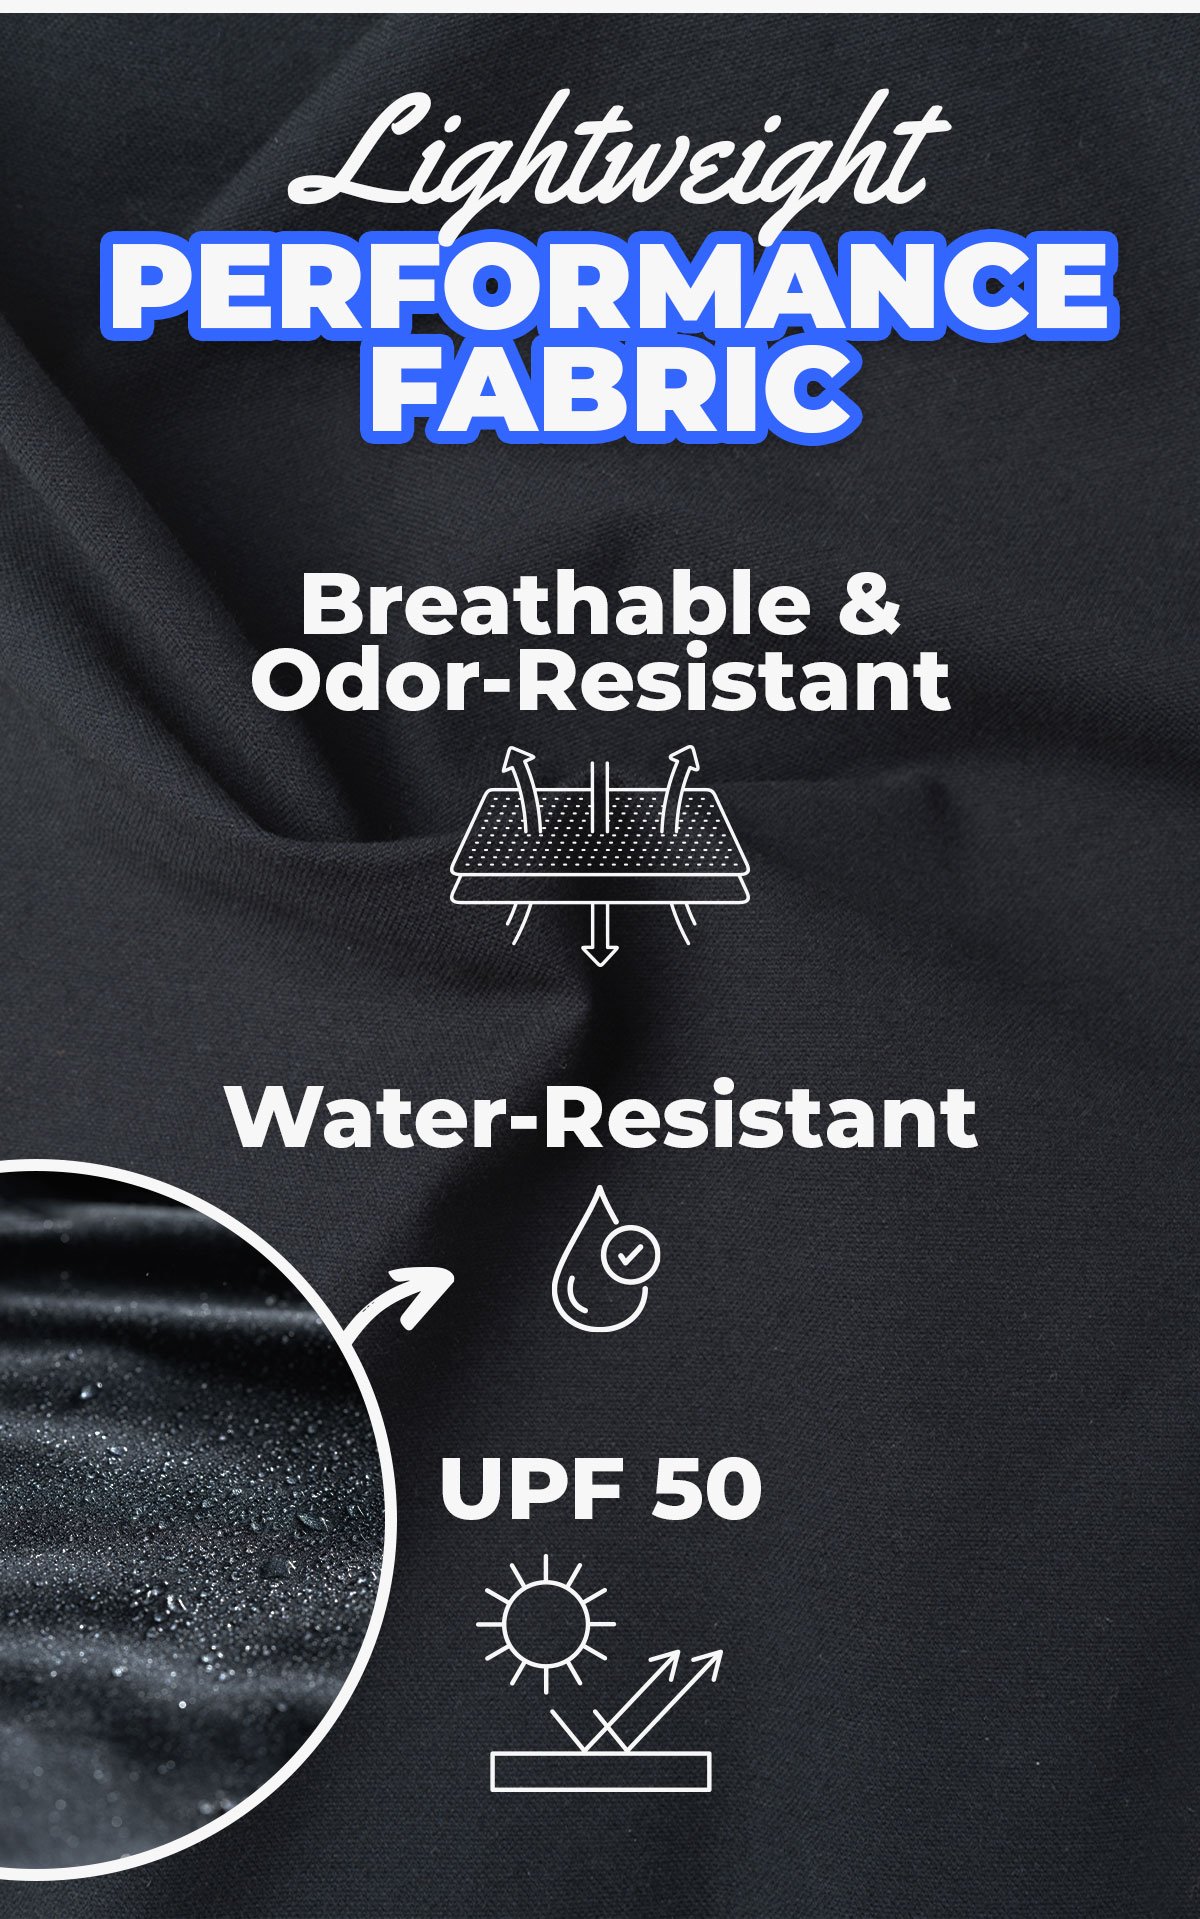 Lightweight performance fabric. Breathable & odor-resistant. Water-resistant. UPF 50.